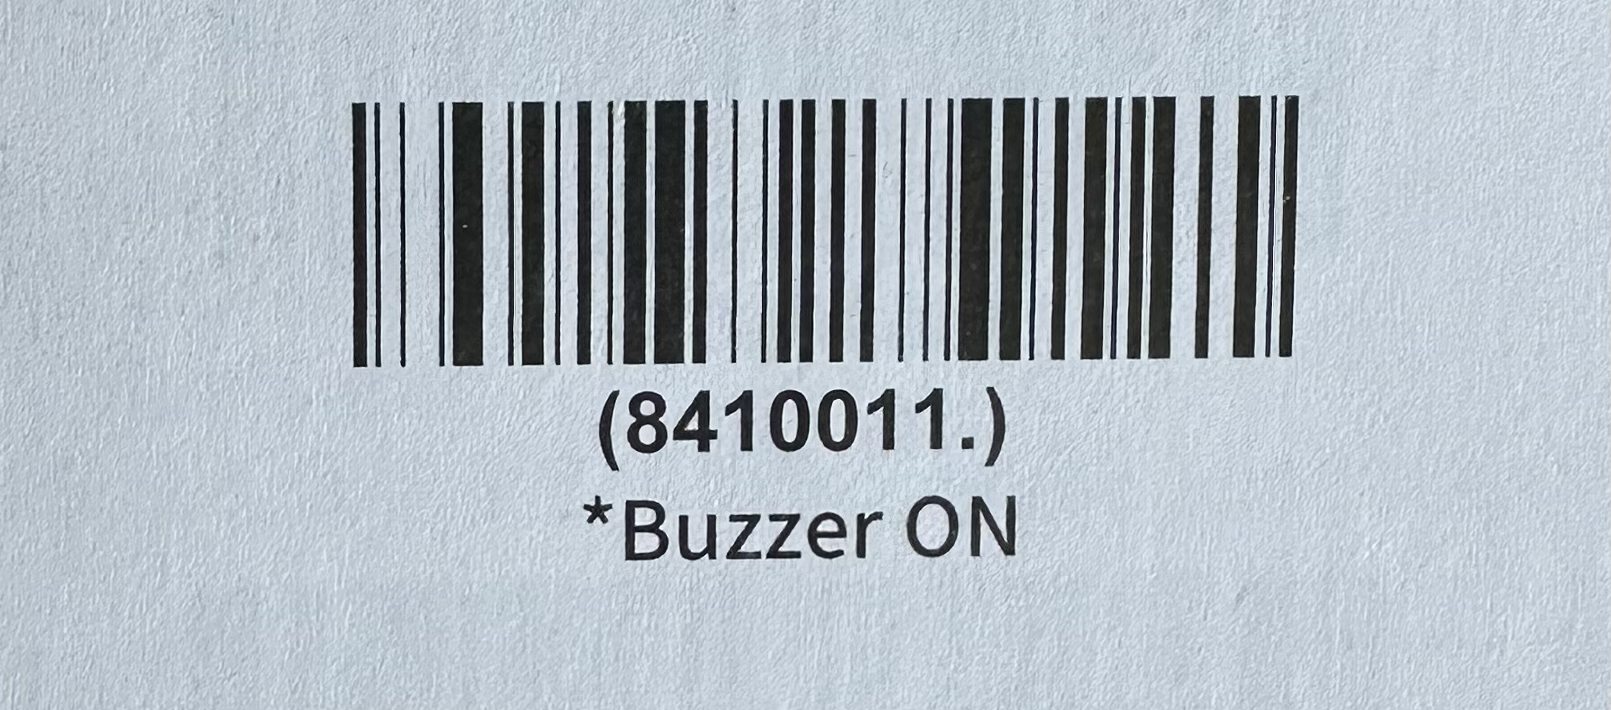 Buzzer_on.png